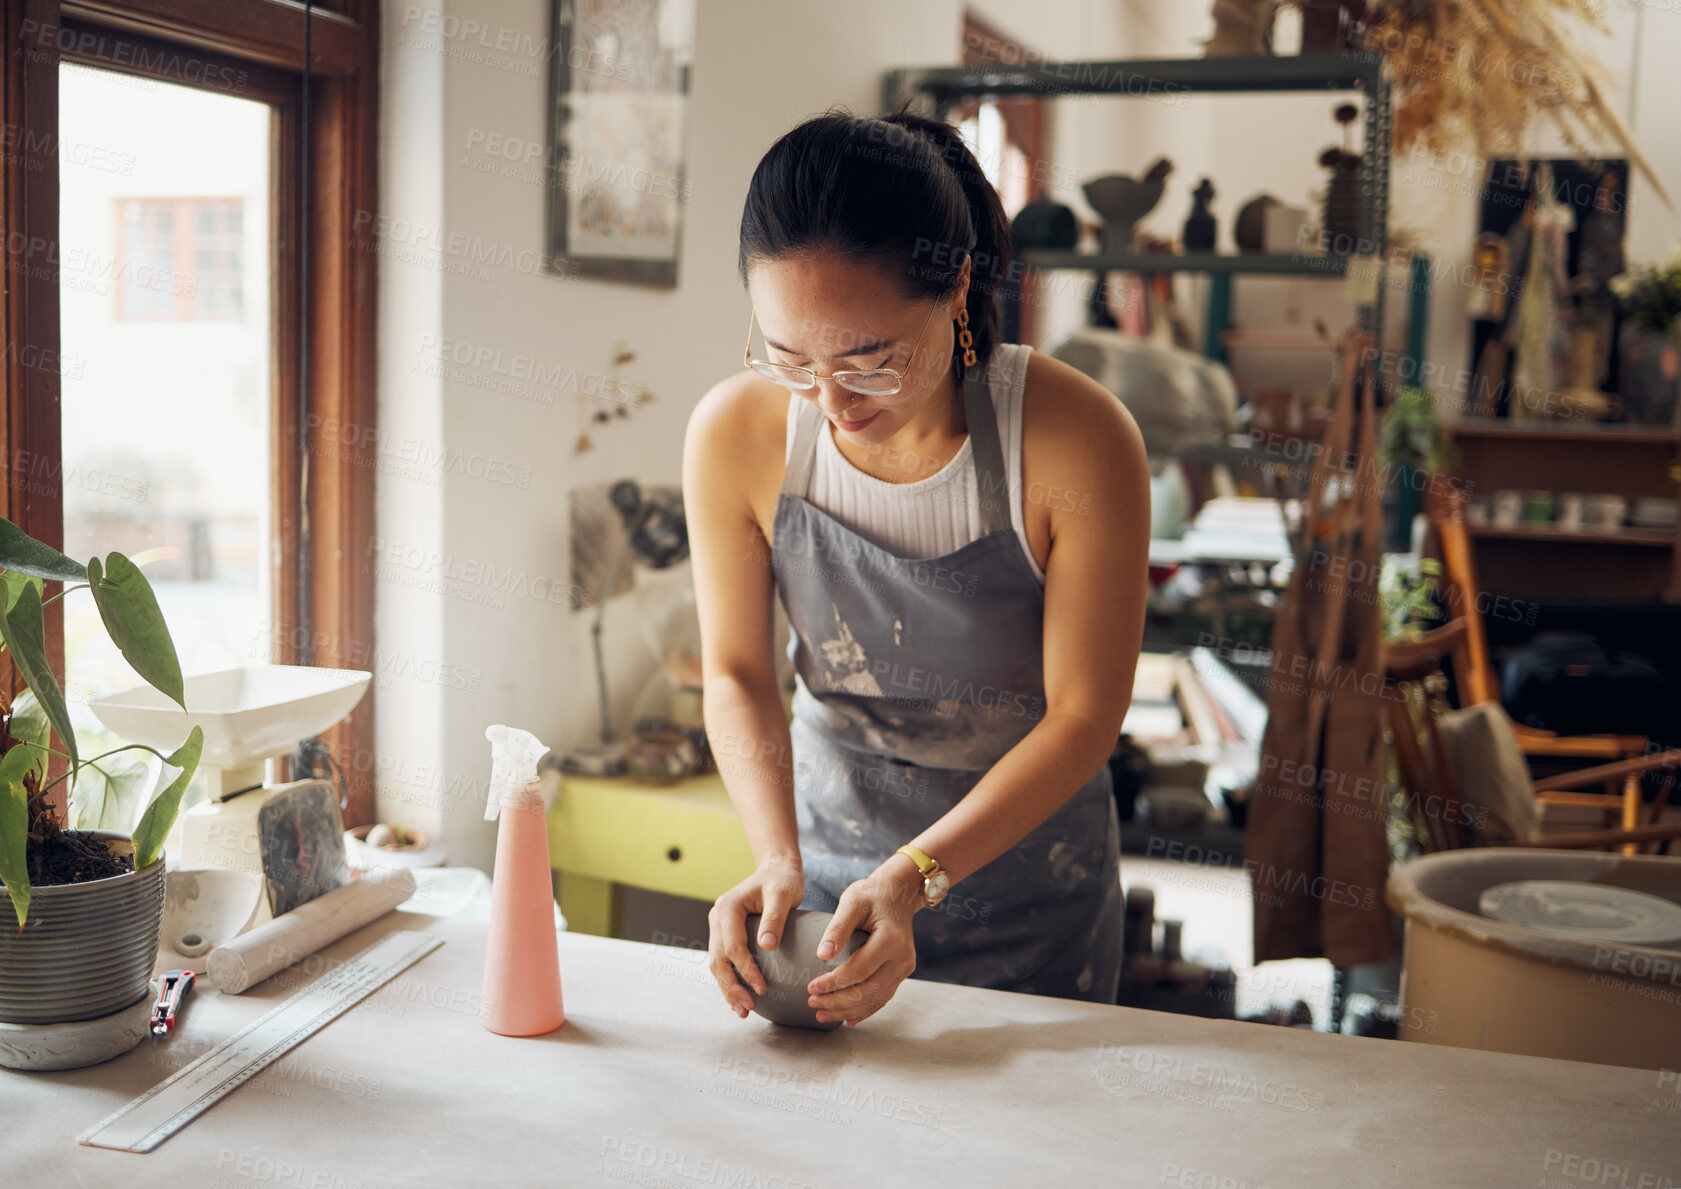 Buy stock photo Design, sculpt and pottery business woman with clay for creativity, inspiration and art process in workshop. Creative, small business and asian girl working at artistic workspace in Tokyo, Japan

